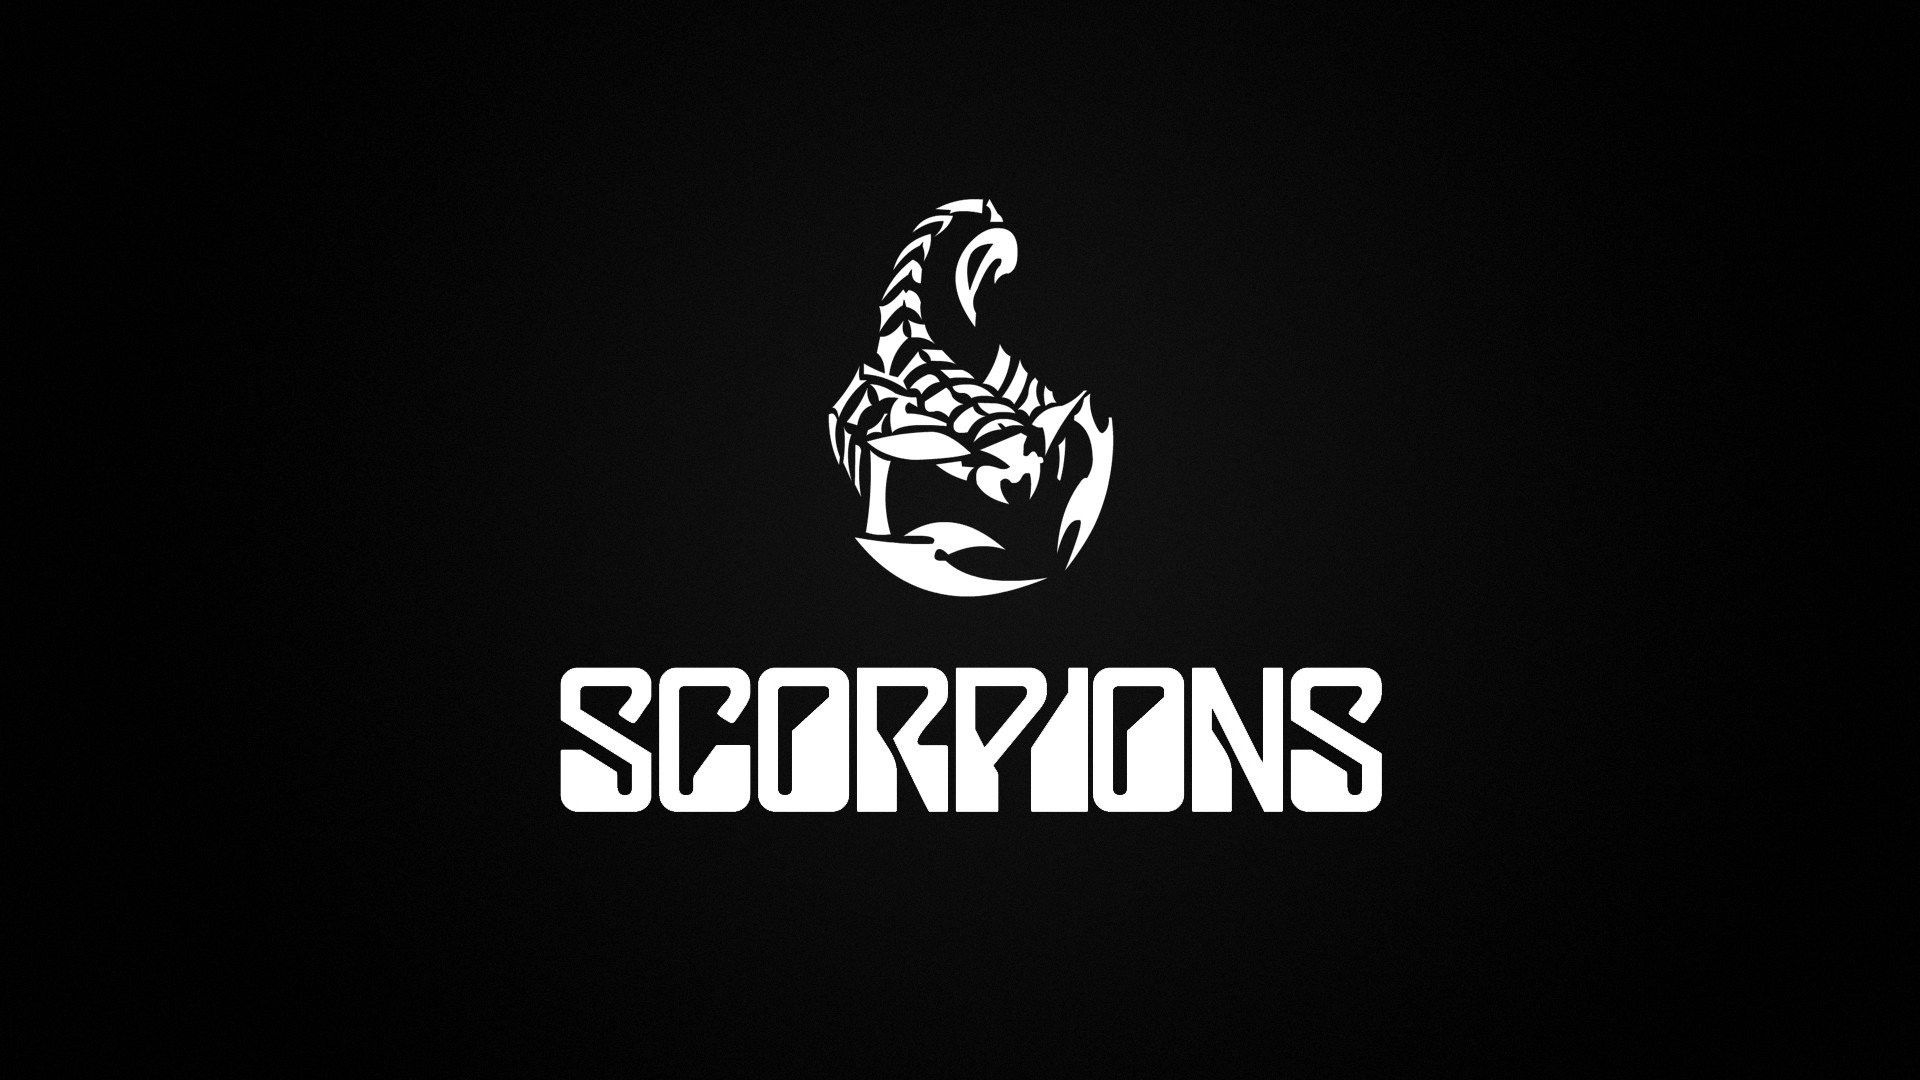 1920x1080 Scorpions Wallpapers Top Free Scorpions Backgrounds